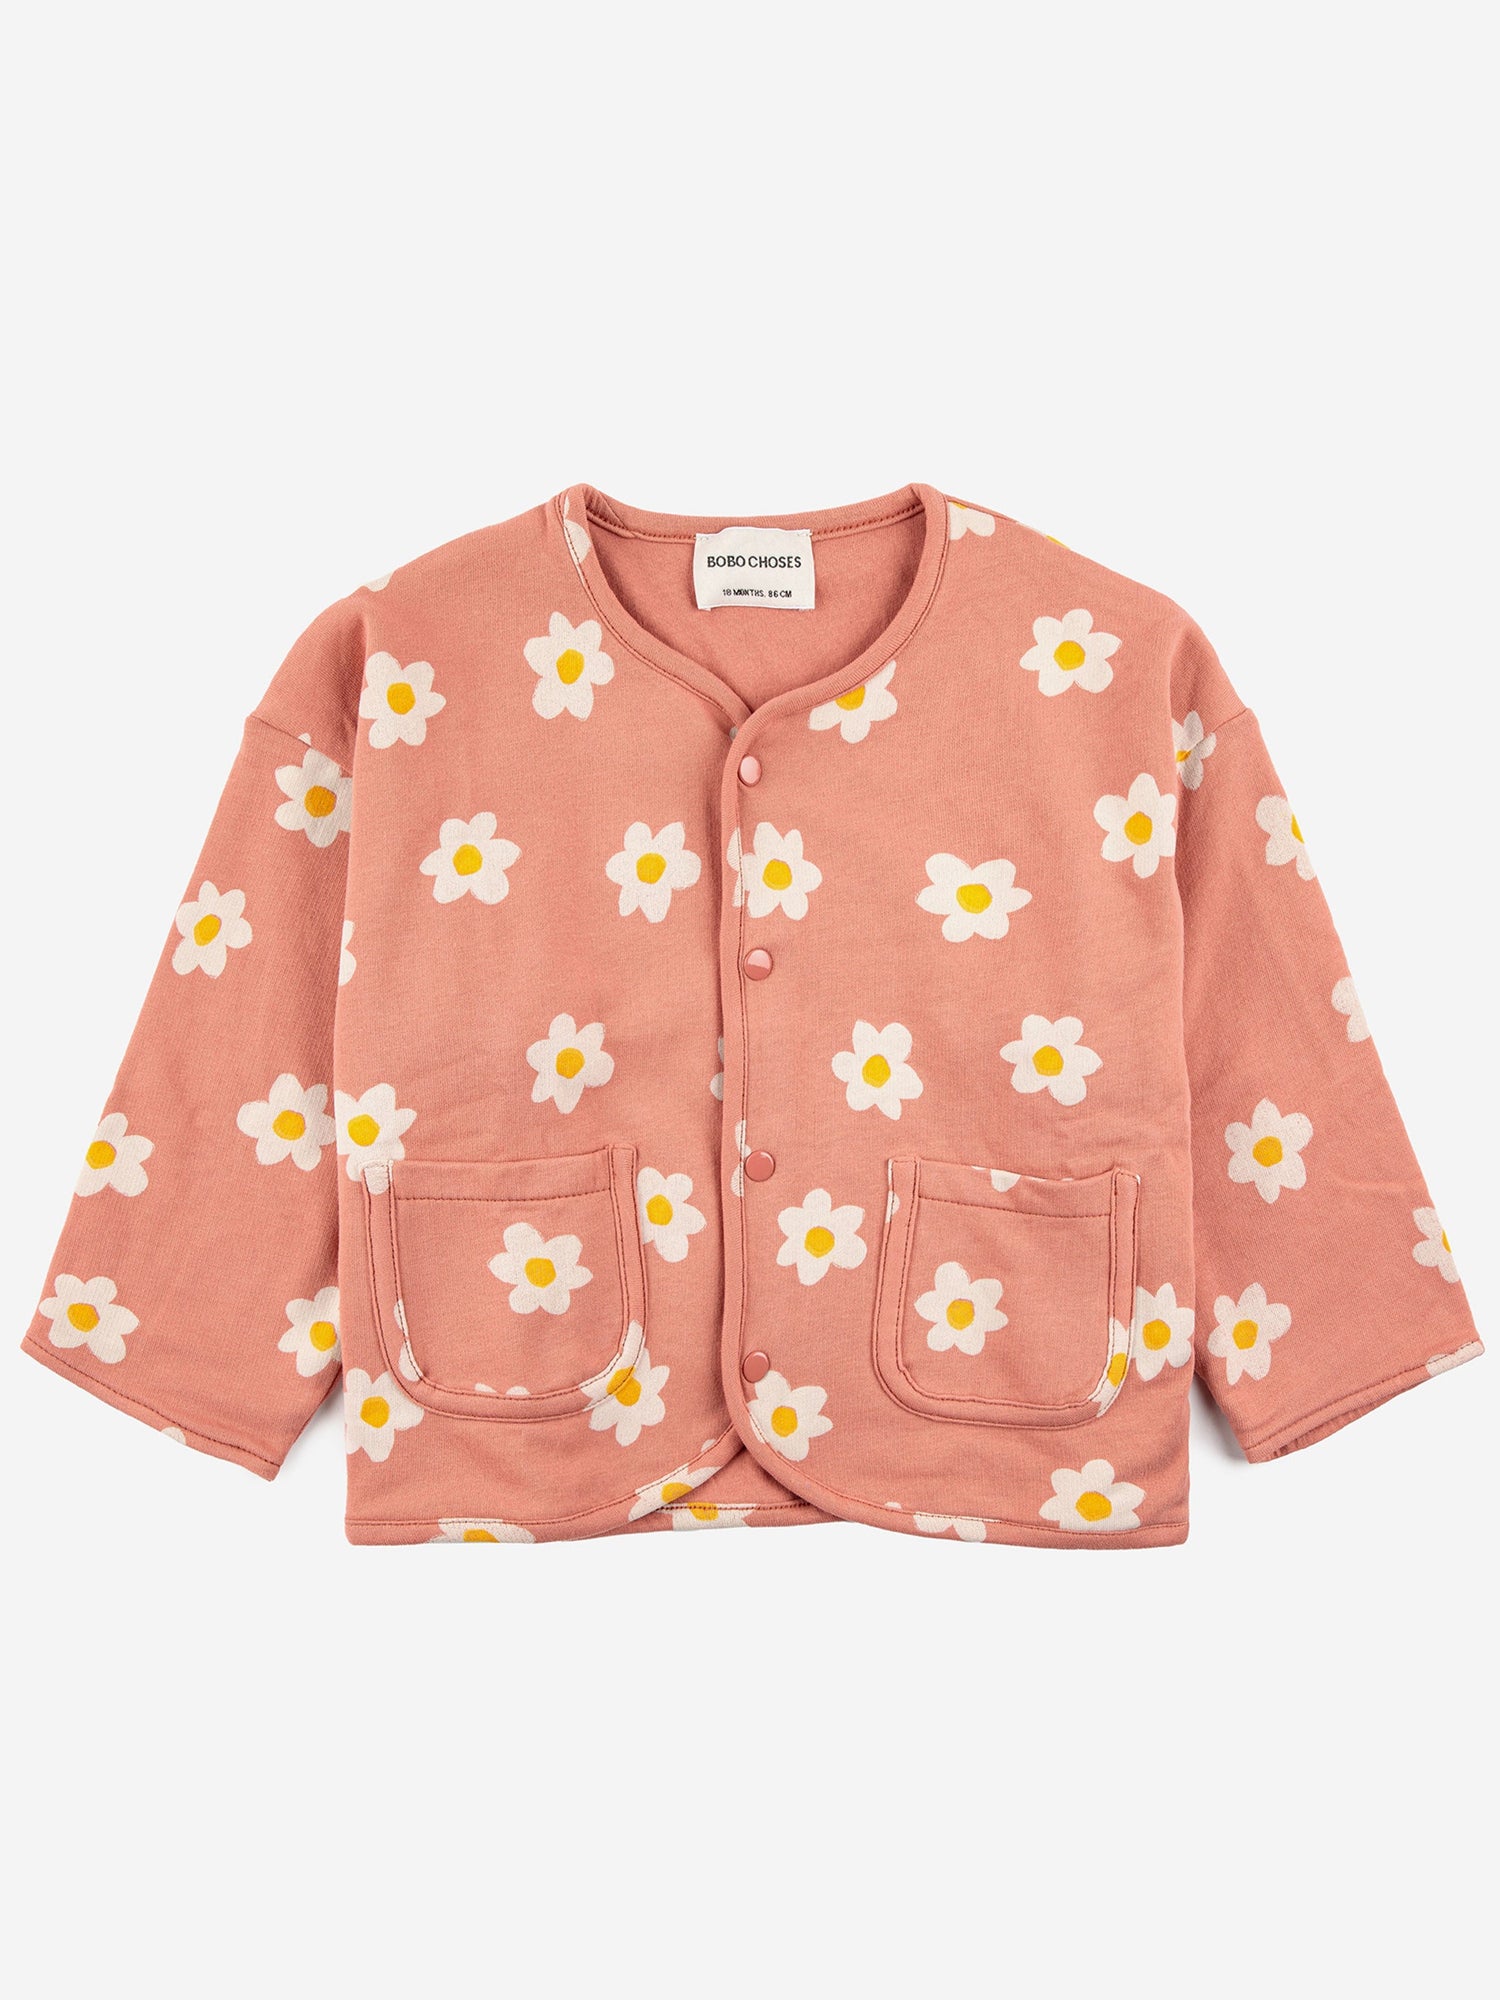 Bobo Choses Baby Little Flower Buttoned Sweatshirt - 95% organic cotton 5% elastane salmon pink with a floral print. Designed as a button down with front pockets. It has a loose fit.  Made ethically and sustainably in Portugal for Bobo Choses.